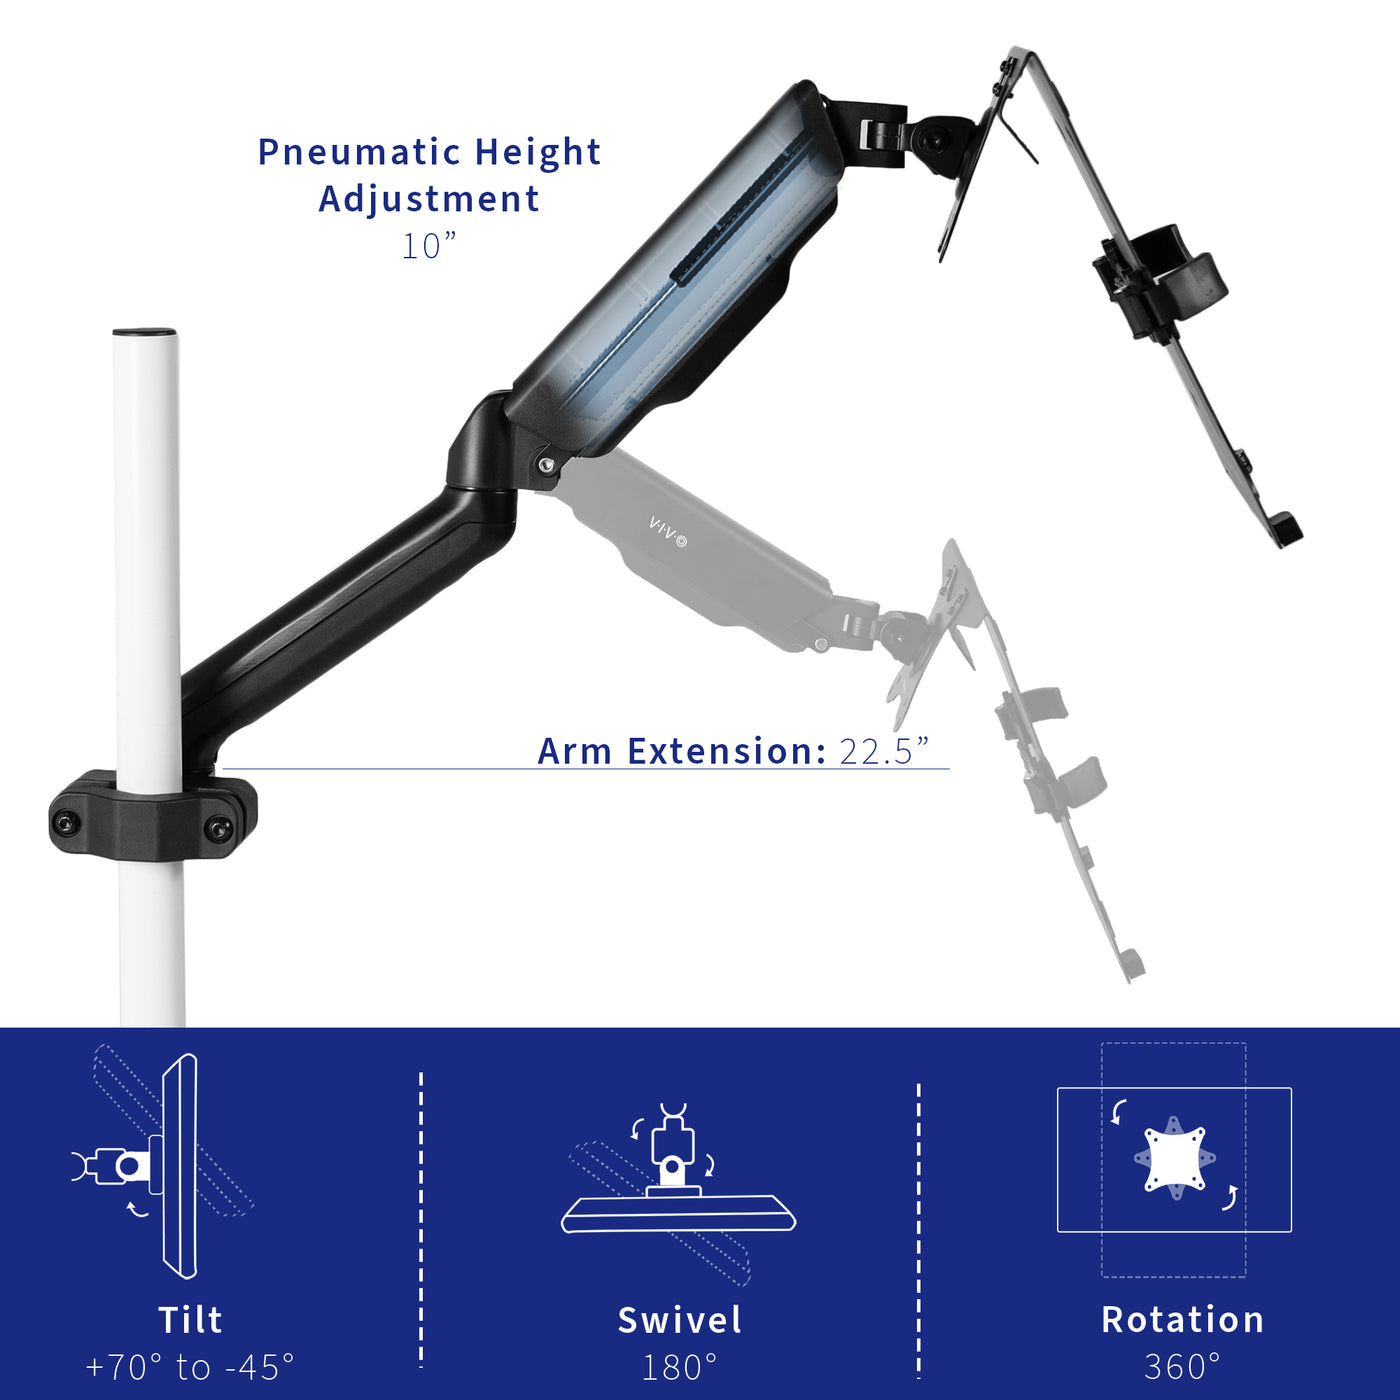 Height adjustments are made easy with a sturdy Pneupanic arm including tilt, rotation, and swivel.